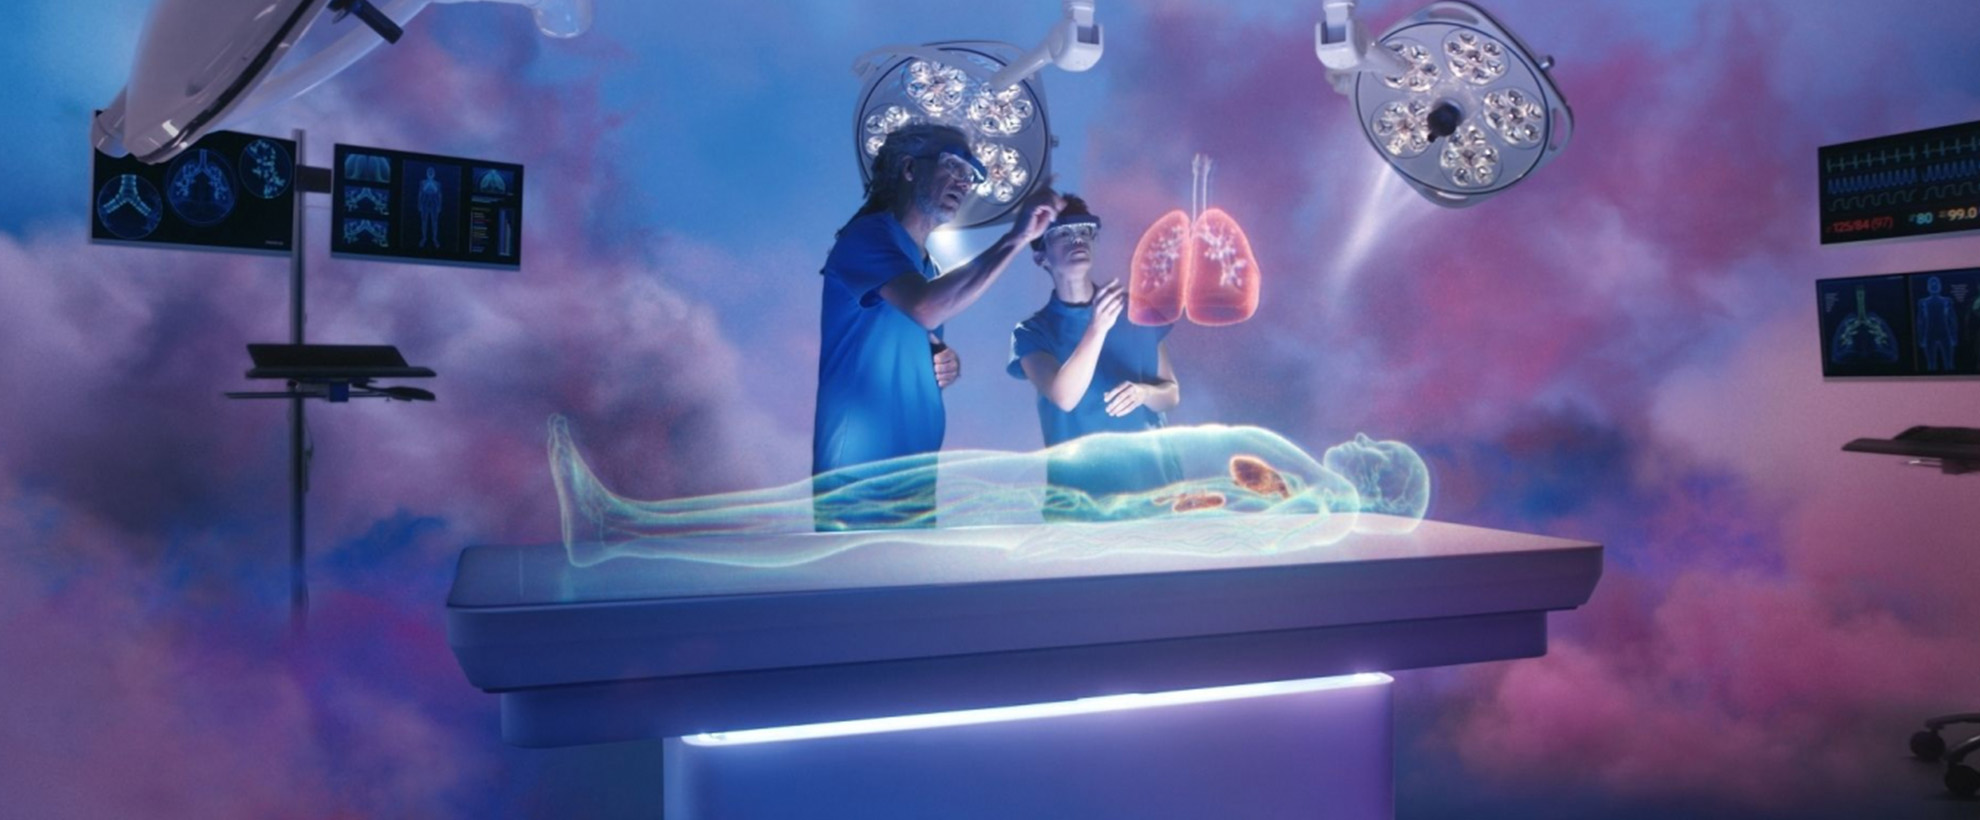 Two surgeons operate on a holographic body, while in the clouds